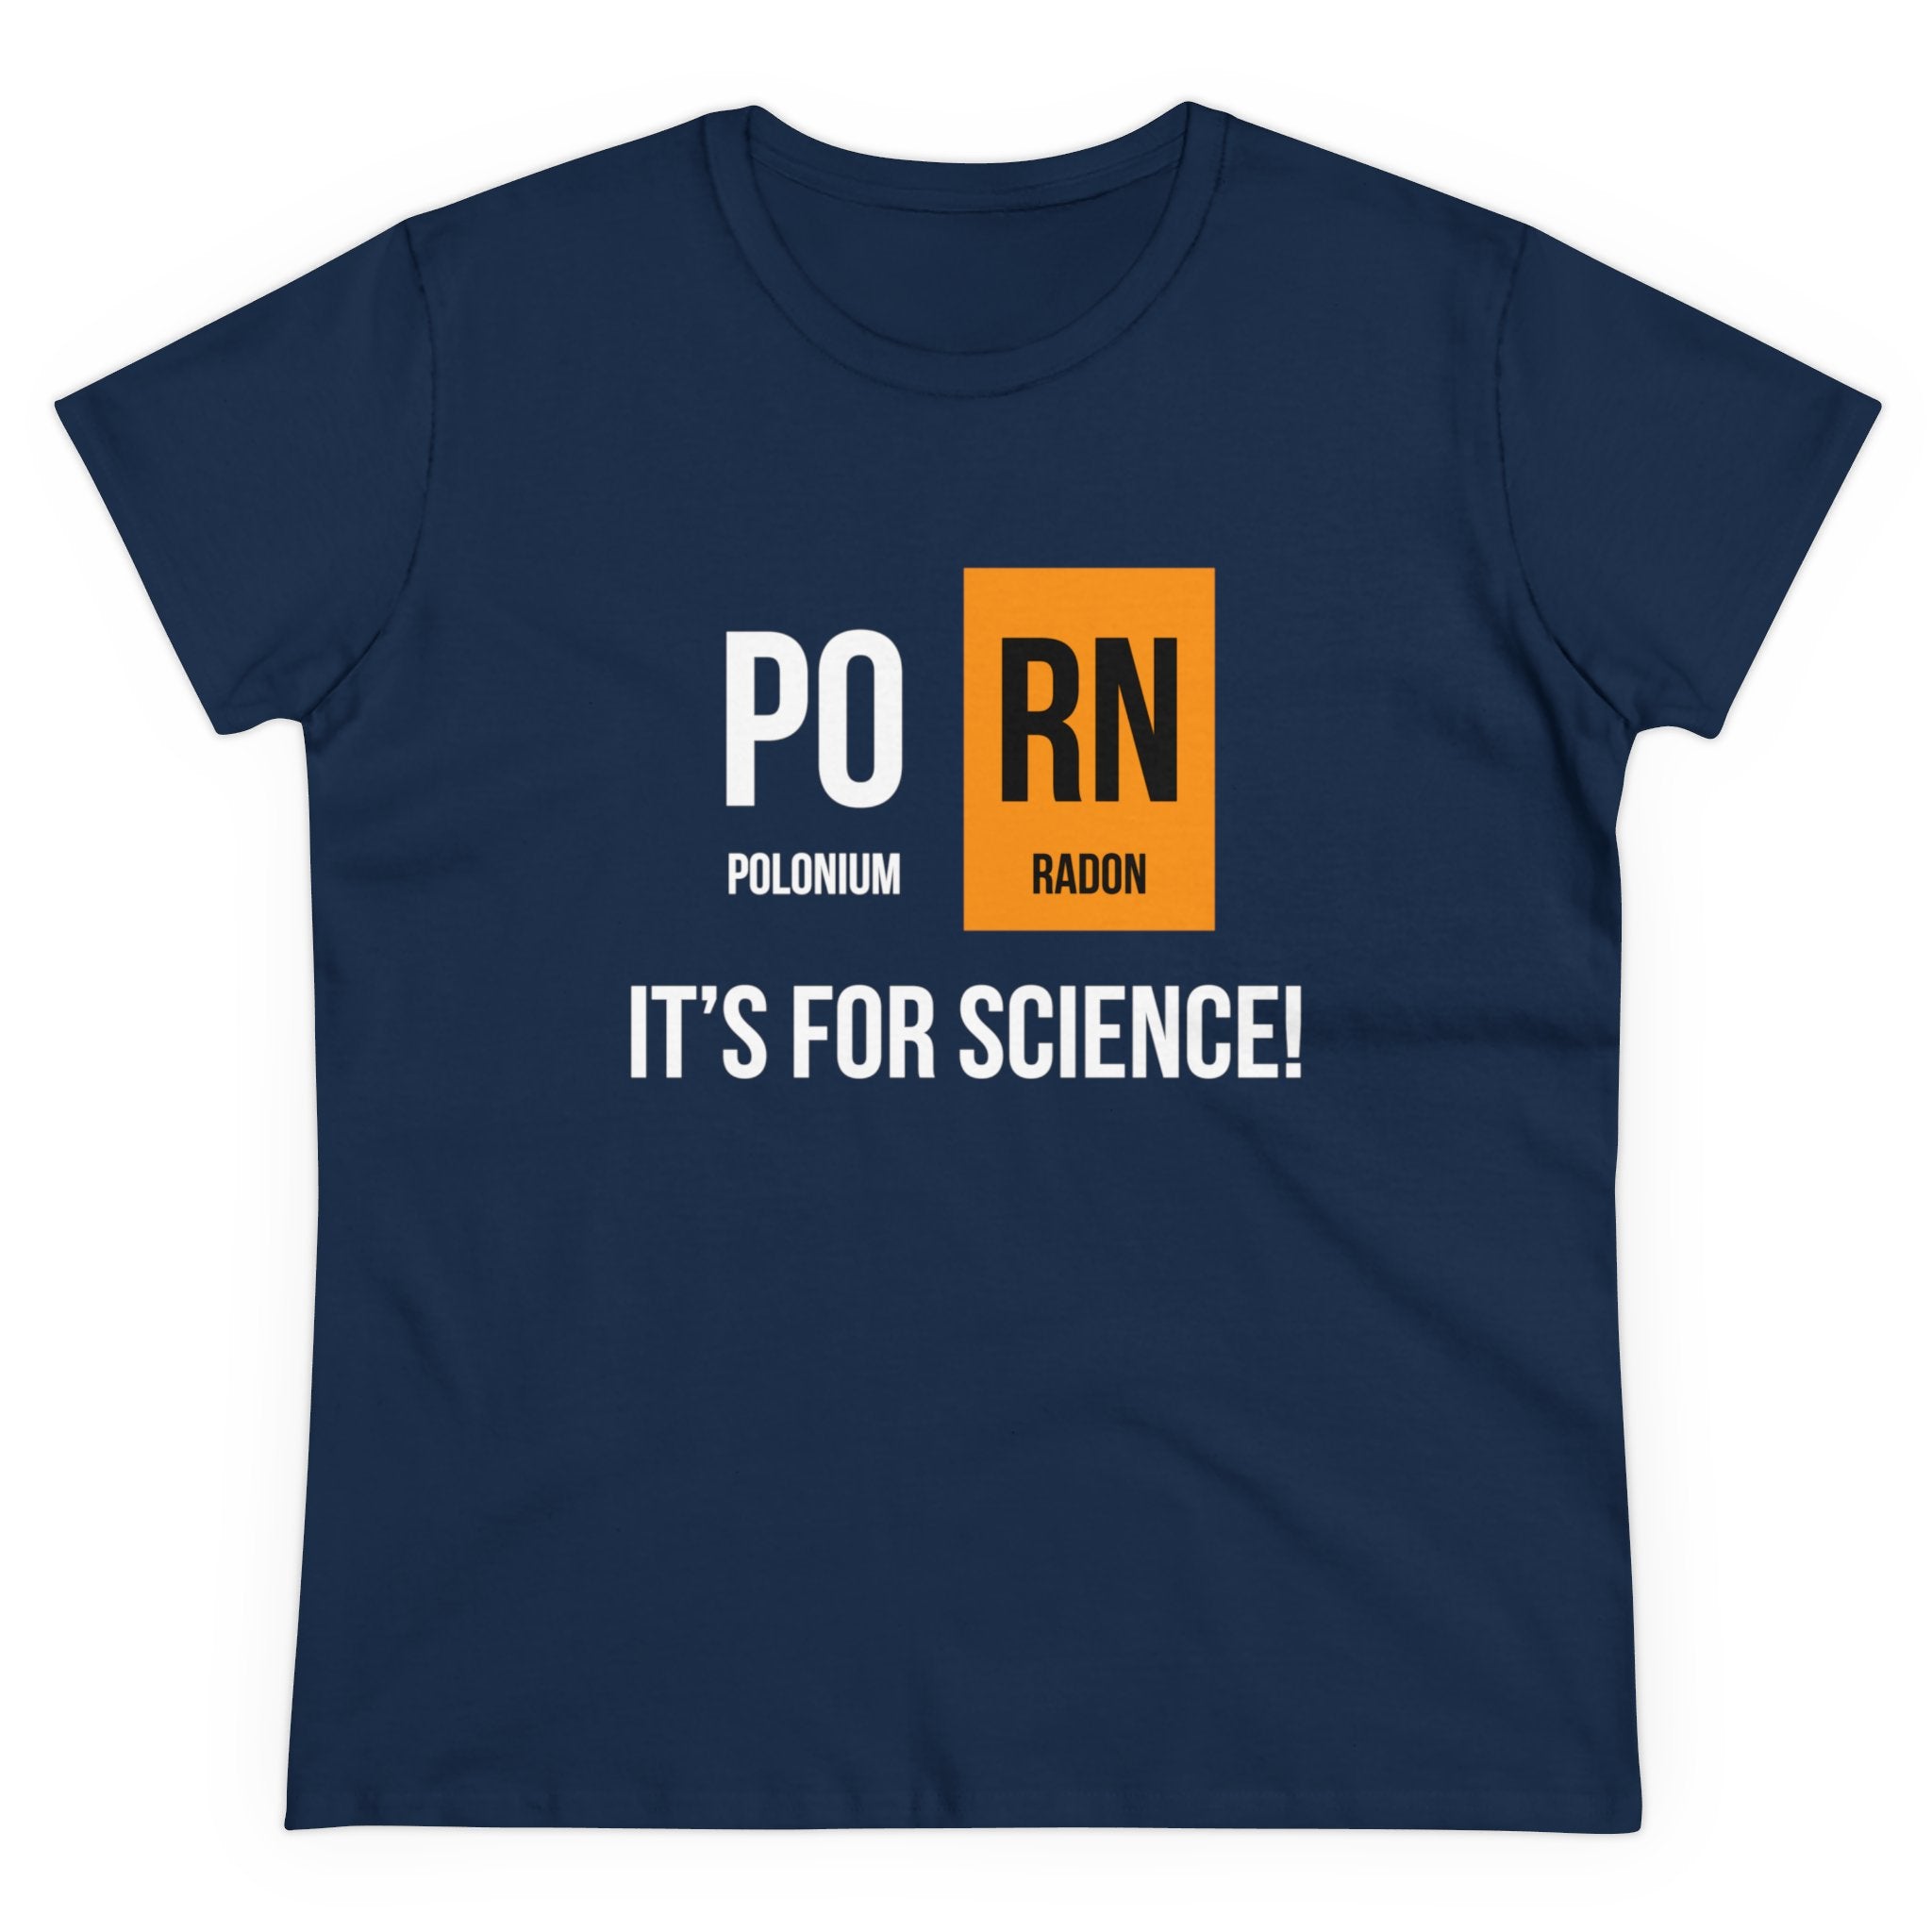 Dark blue Women's Tee with "Po RN It's for science!" printed on it. "Po" symbolizes Polonium, and "Rn" symbolizes Radon from the periodic table. This sustainable PO-RN - Women's Tee combines style with a nod to chemistry.